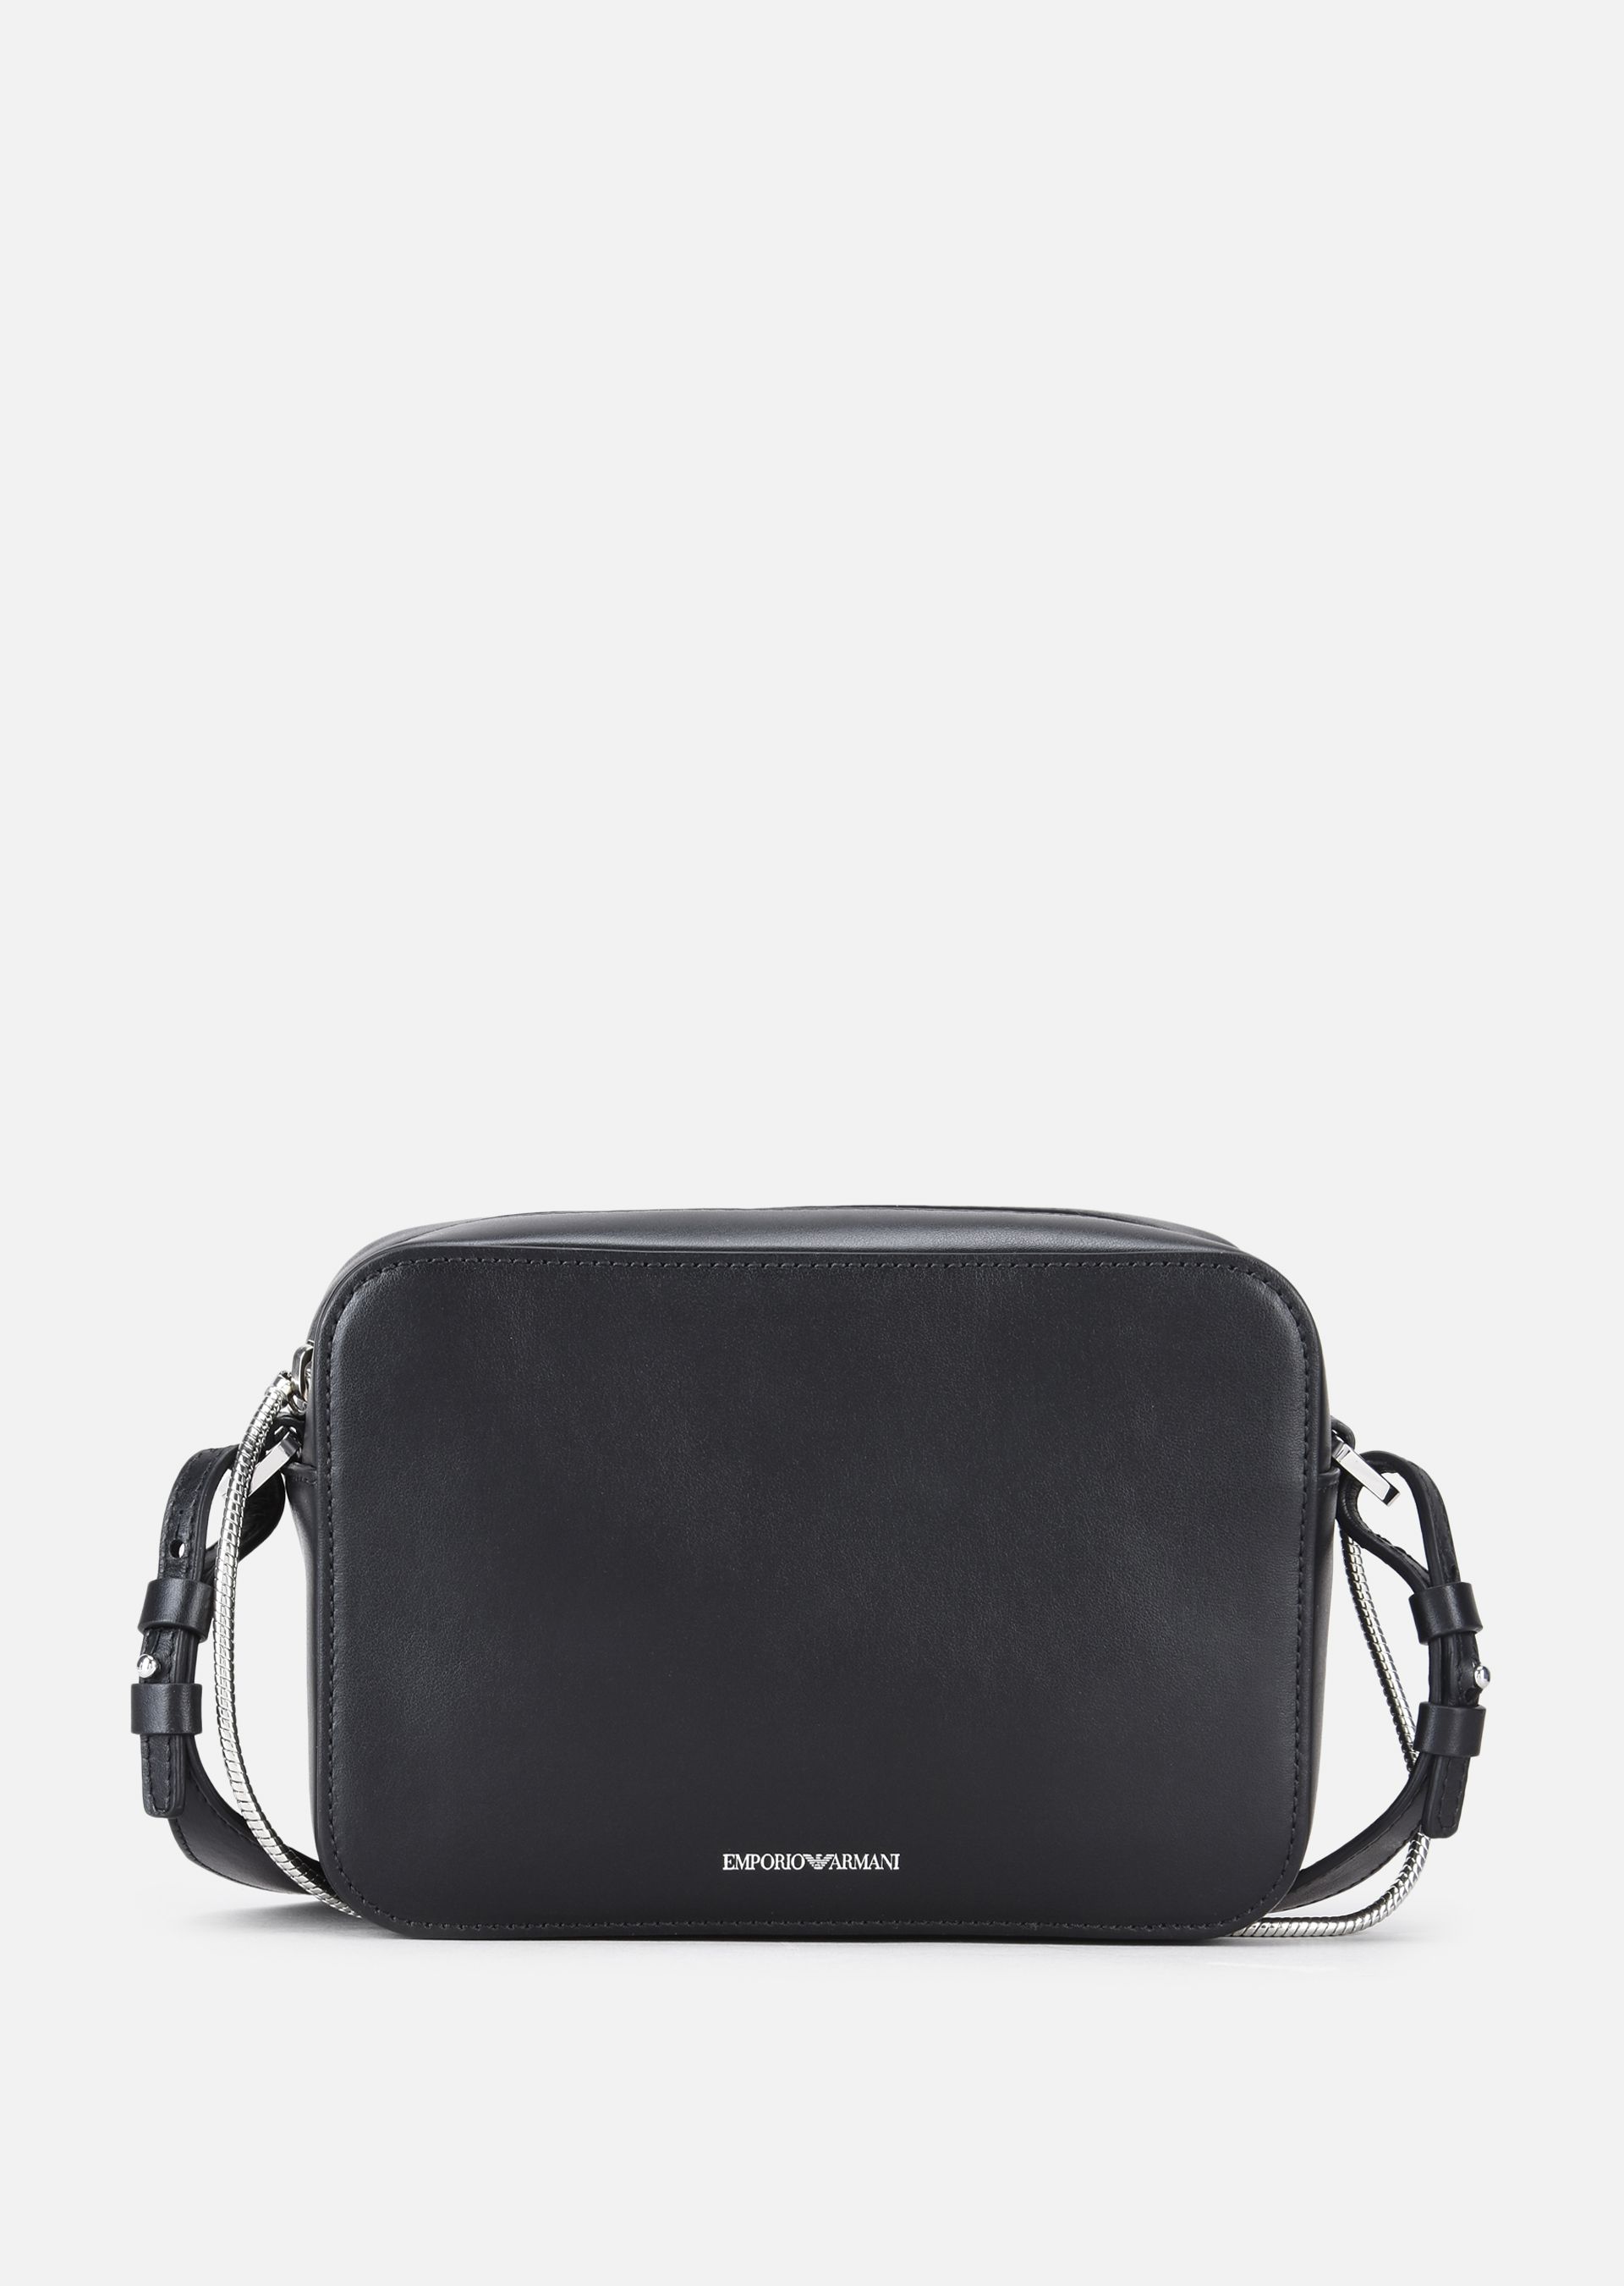 SMOOTH LEATHER CROSS BODY BAG WITH CHAIN for Women | Emporio Armani